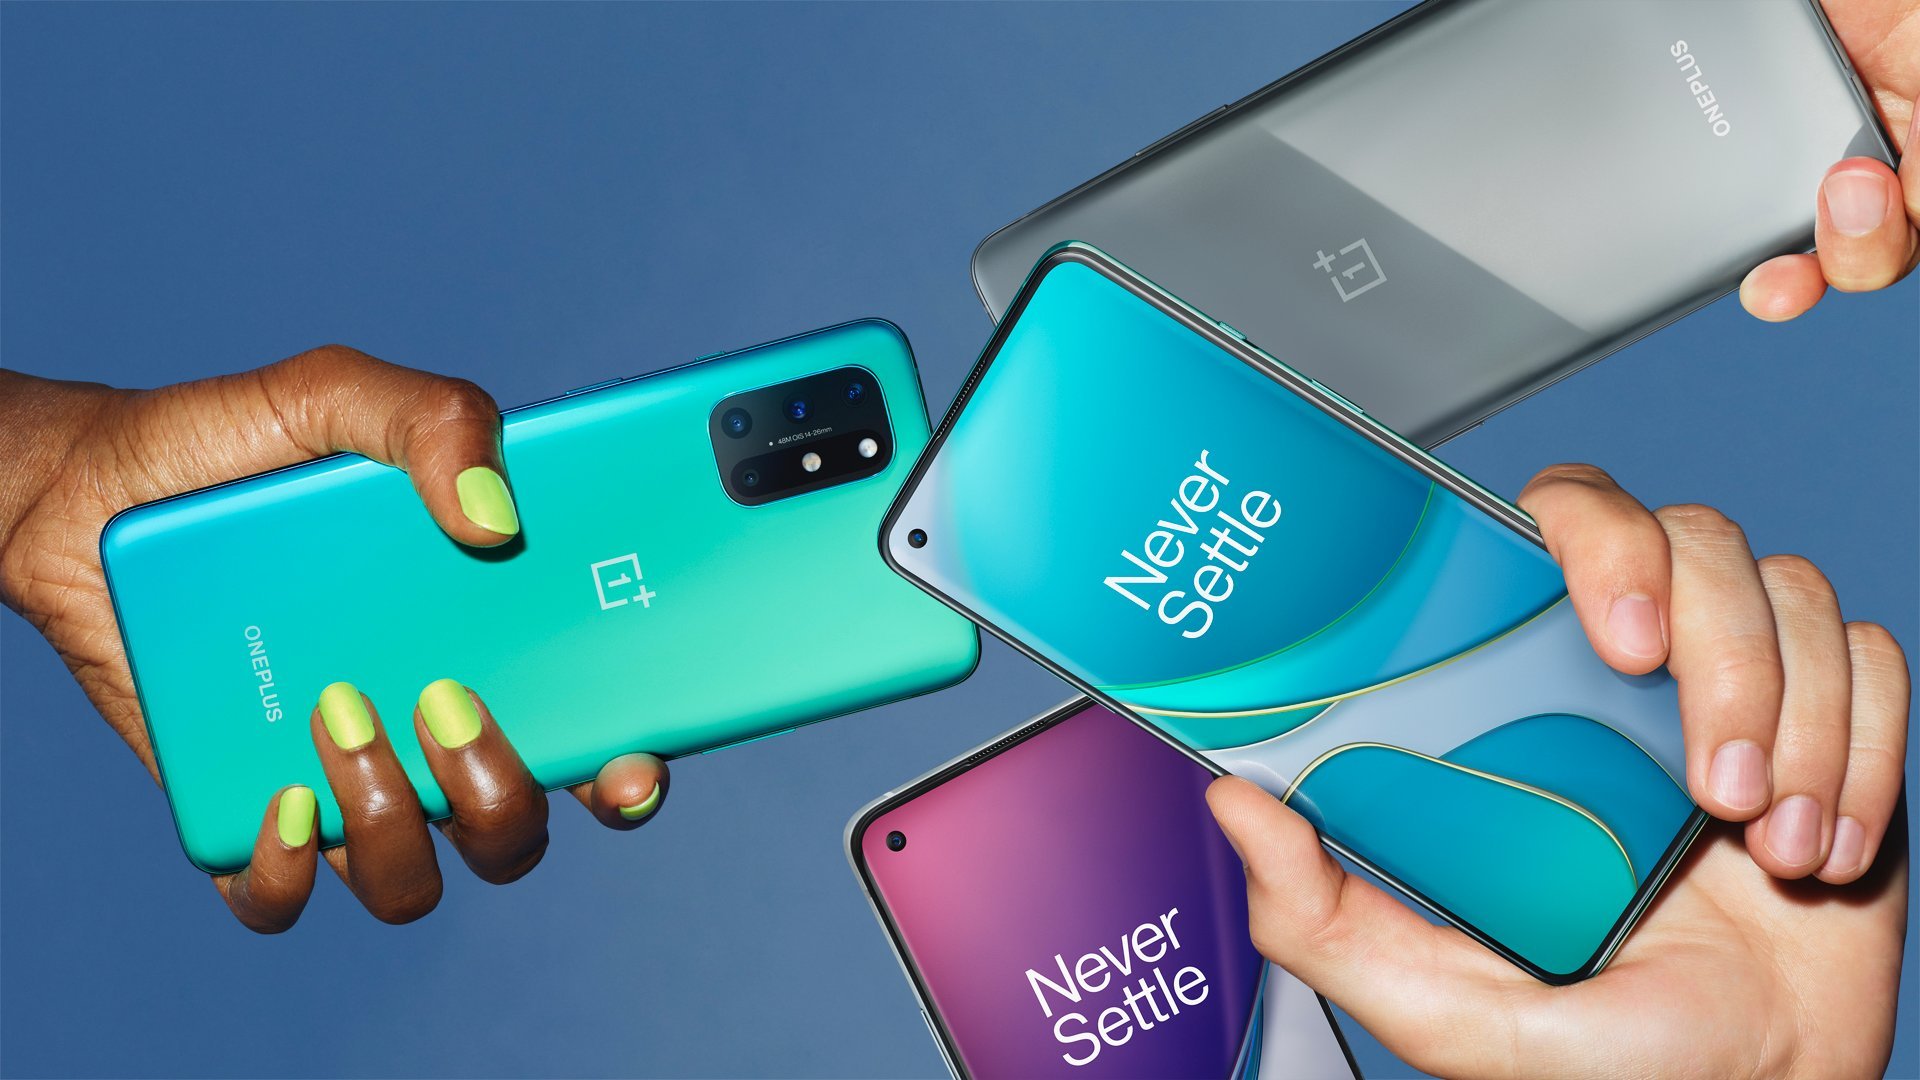 OnePlus 8T Verizon-exclusive variant is not launching